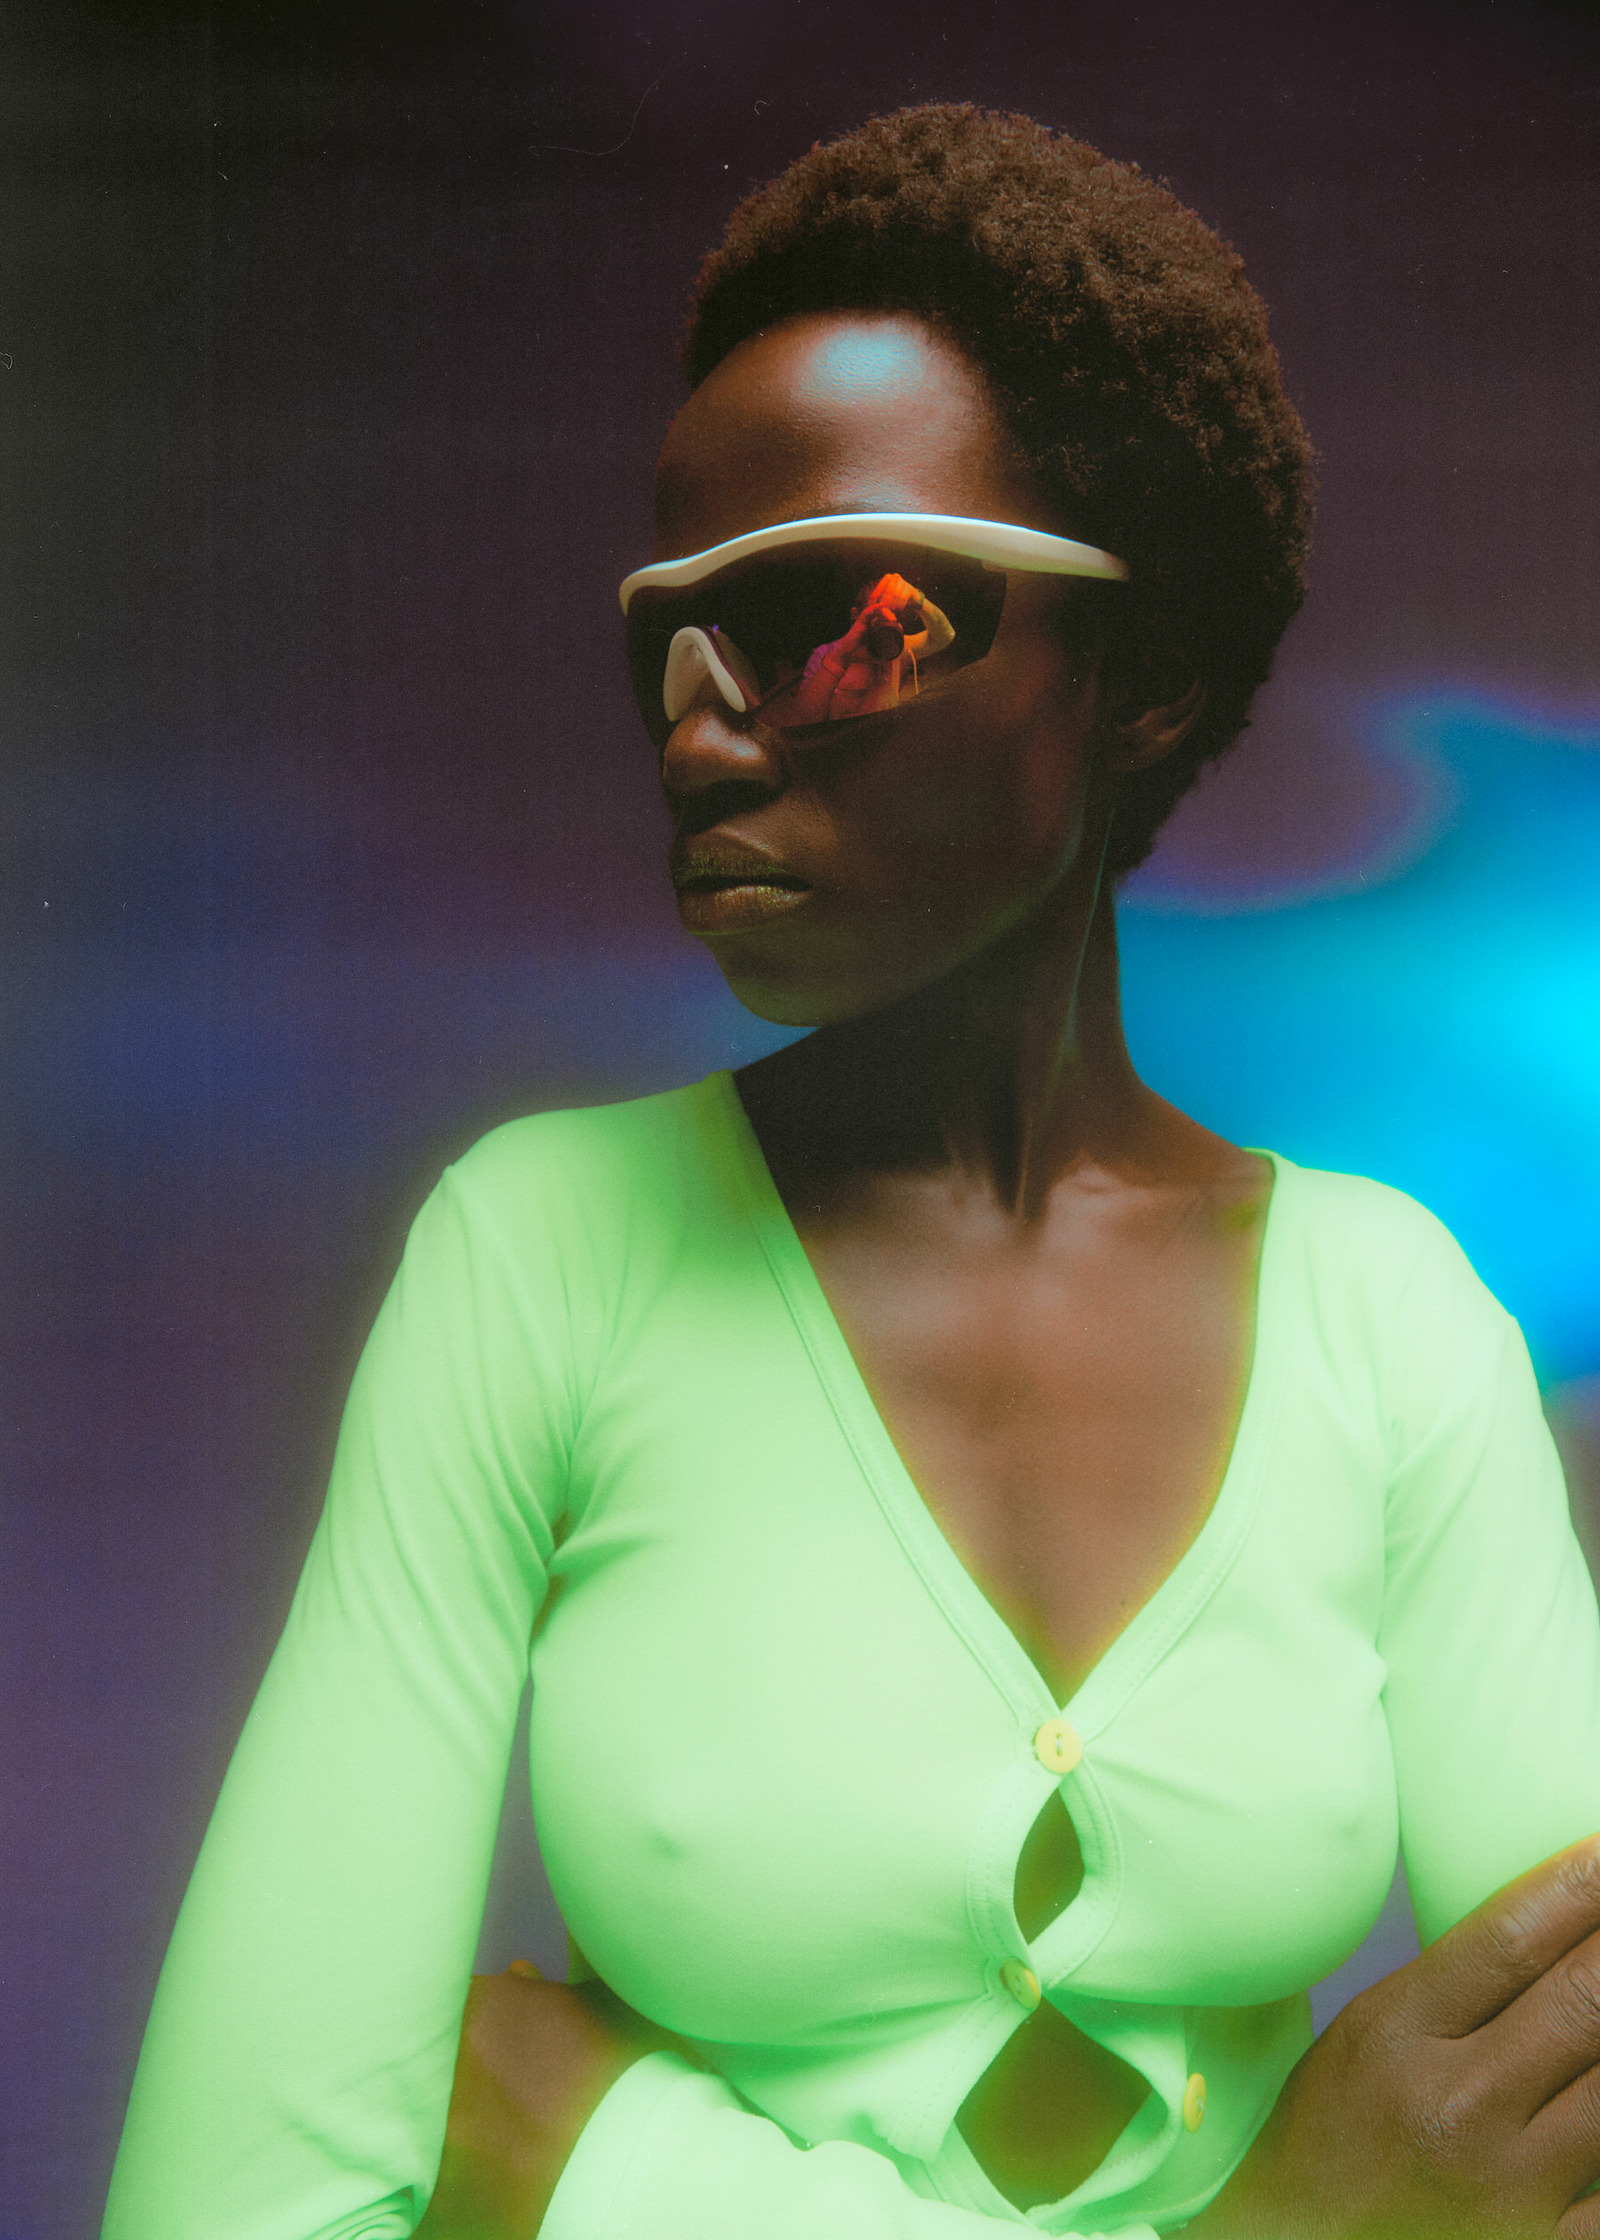 a woman in a green shirt with sunglasses